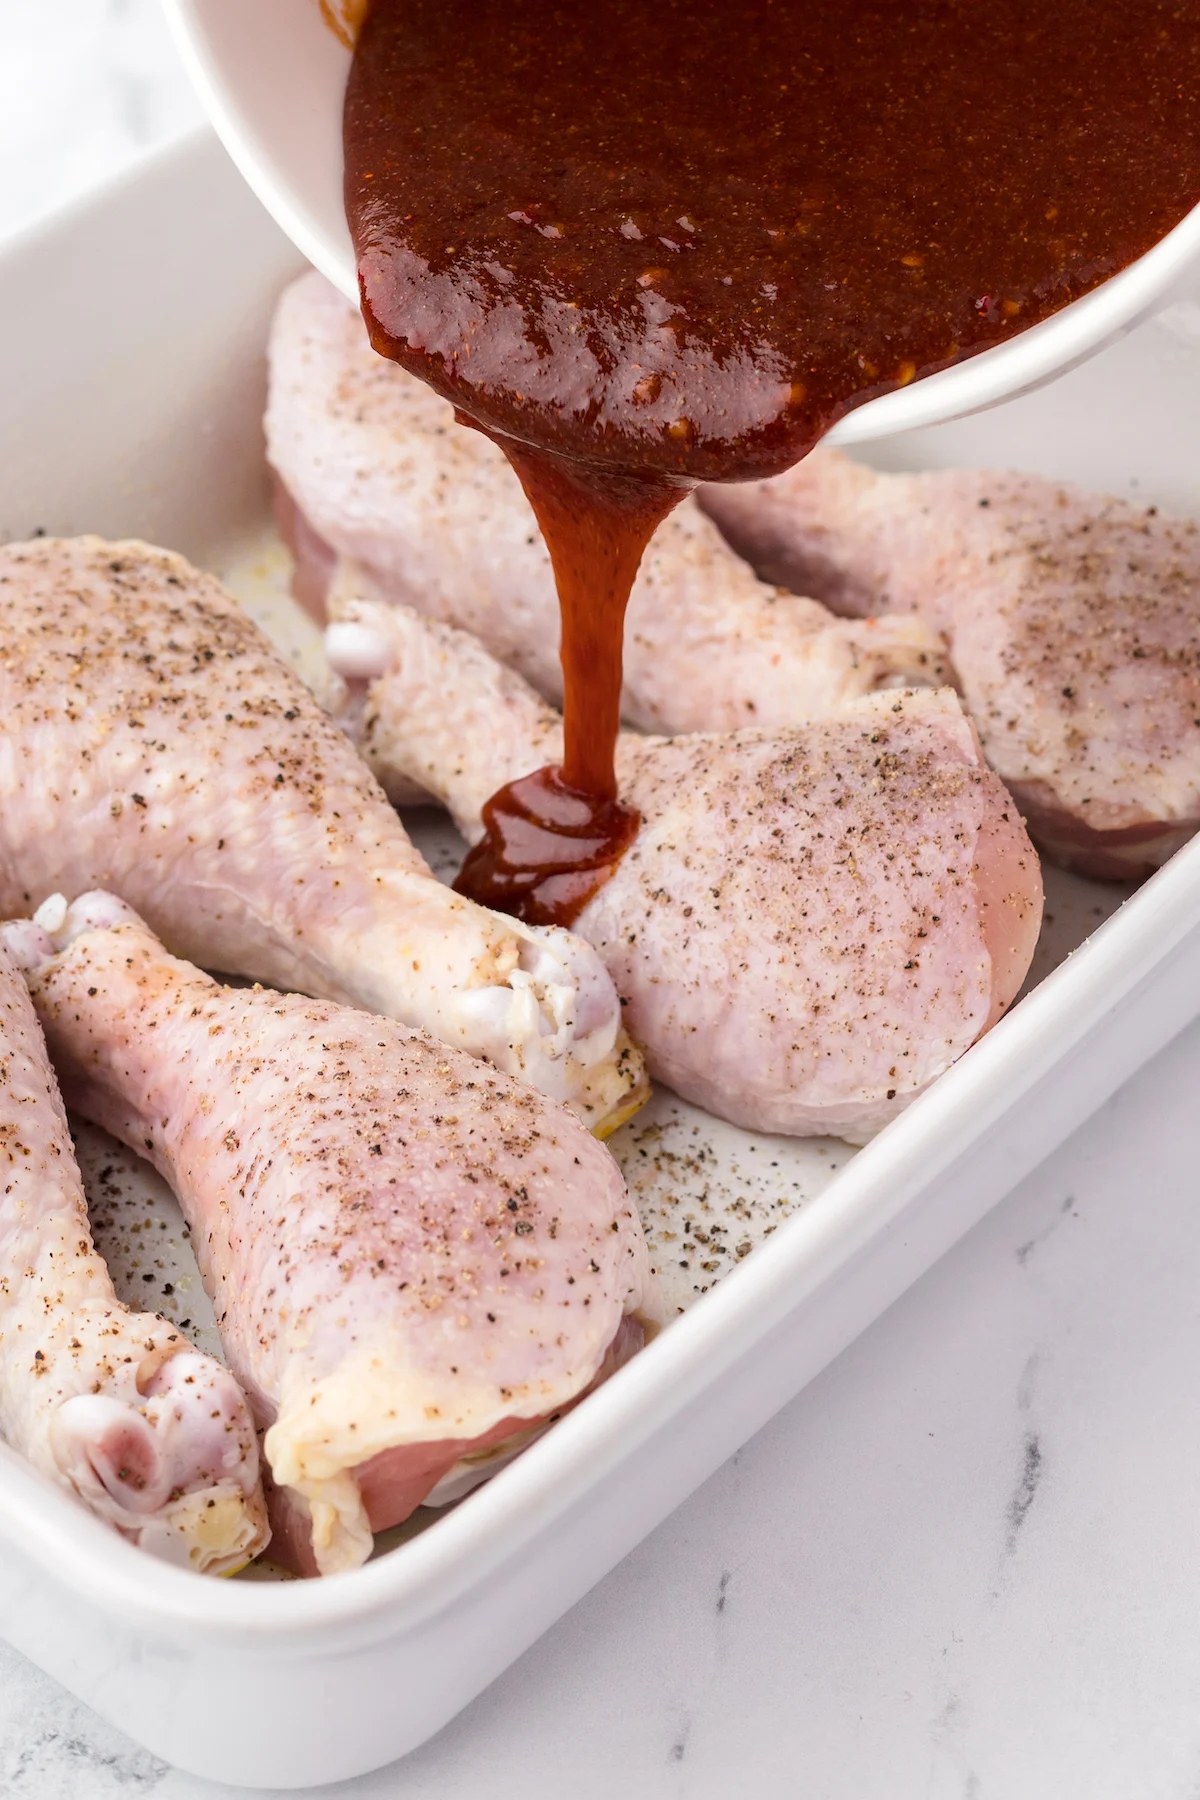 Pouring BBQ Sauce over chicken drumsticks to prepare for baking in oven